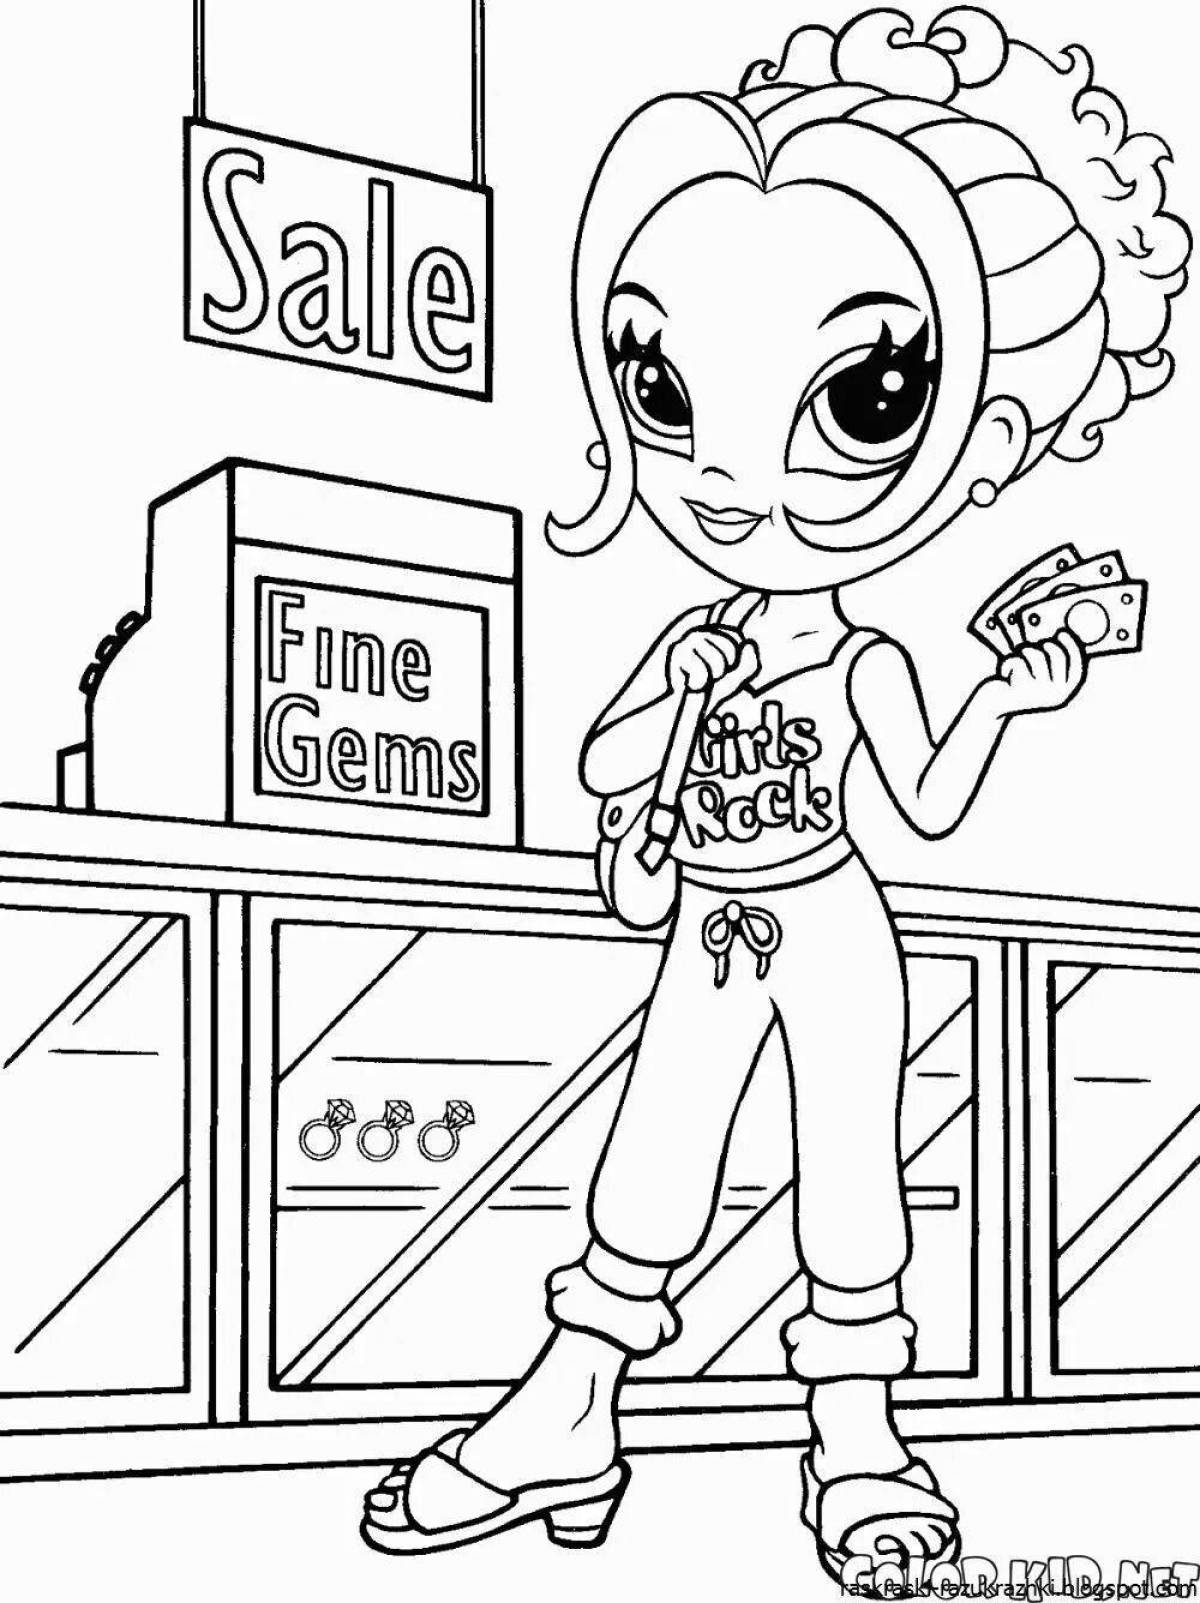 Adorable coloring game for girls 9-10 years old